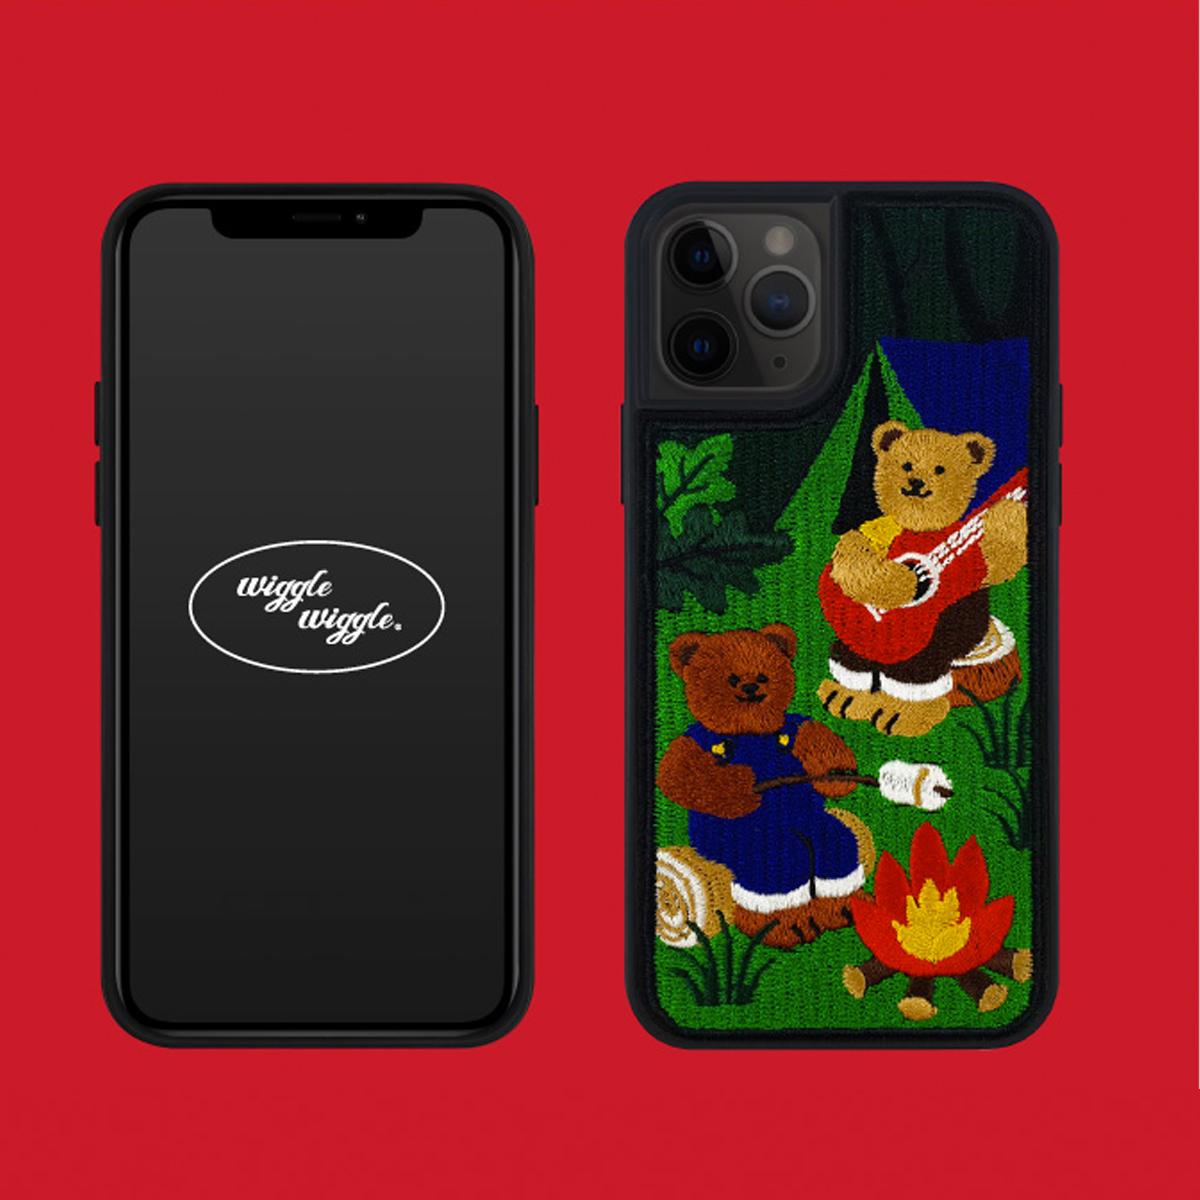 iPhone Embroidery Case Season 3 (Camping)